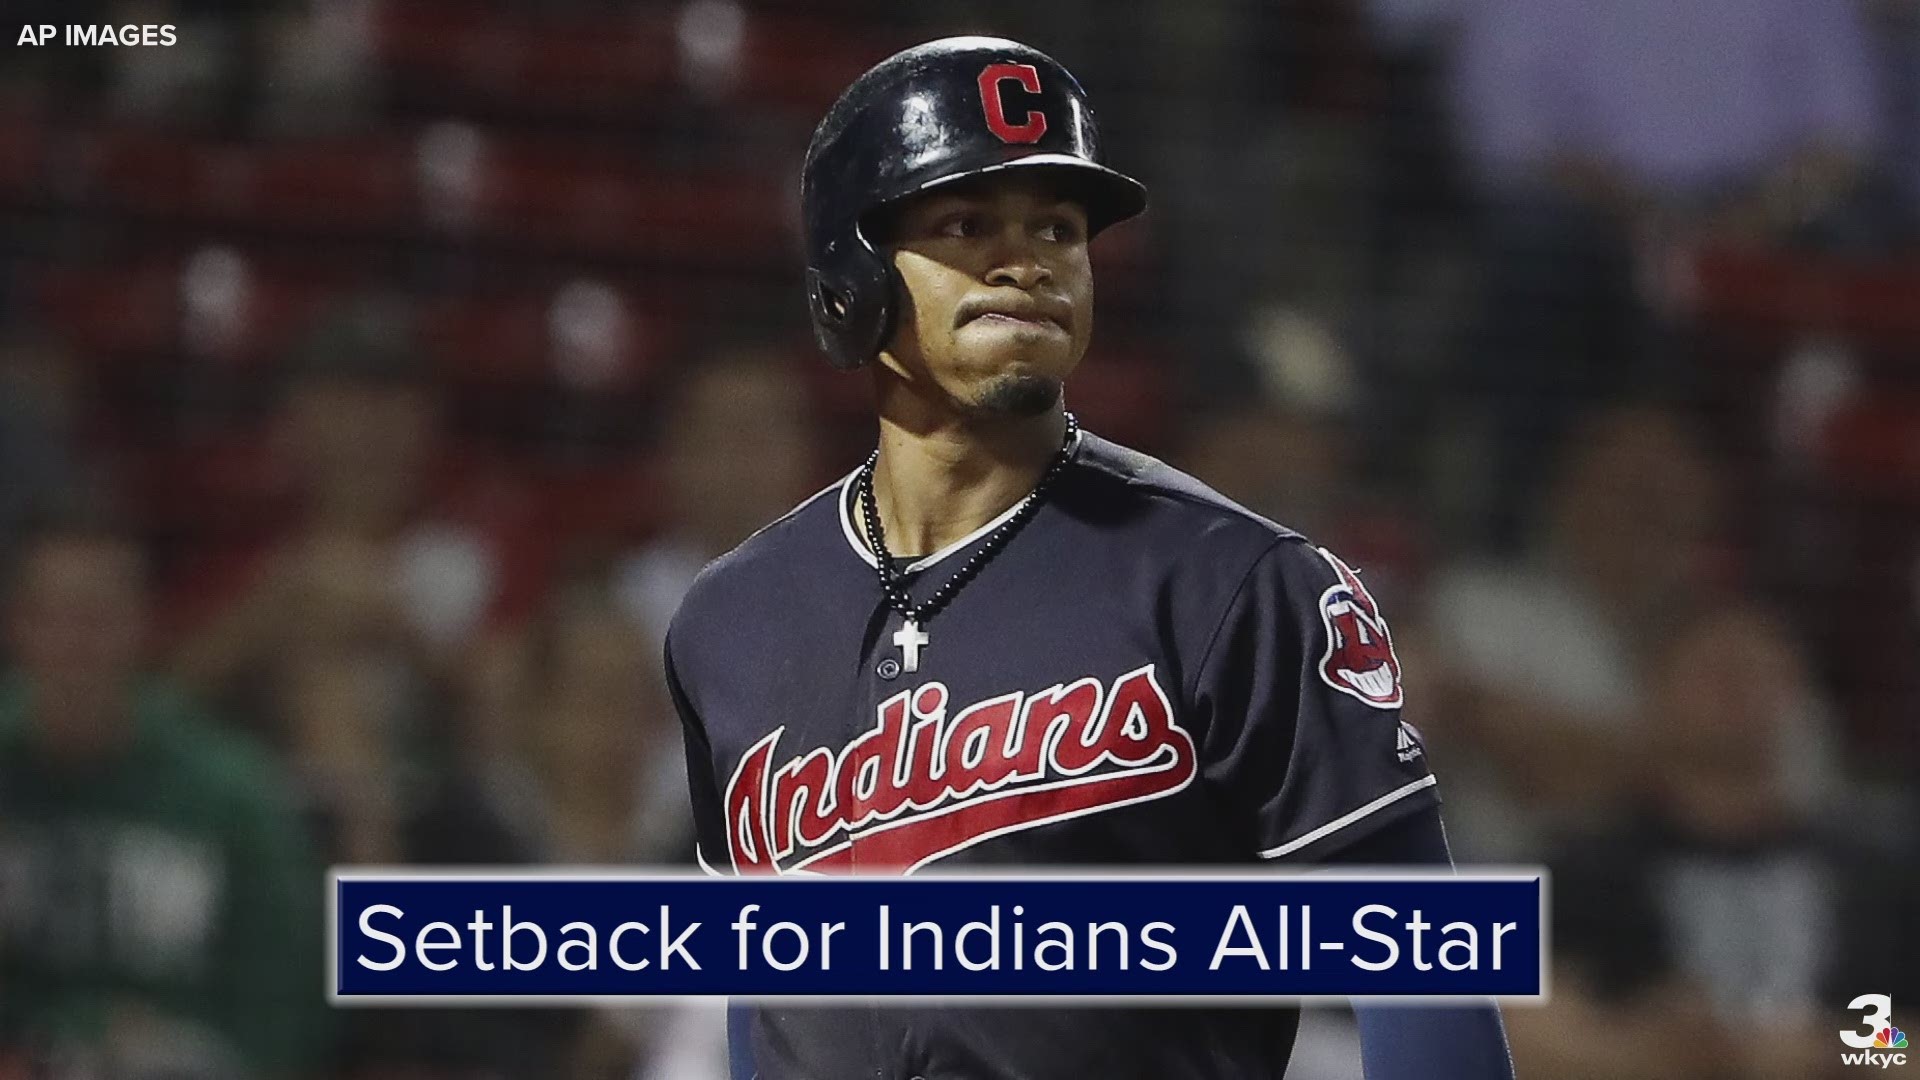 According to the Cleveland Indians, shortstop Francisco Lindor has suffered a sprained ankle, likely delaying his 2019 season debut.